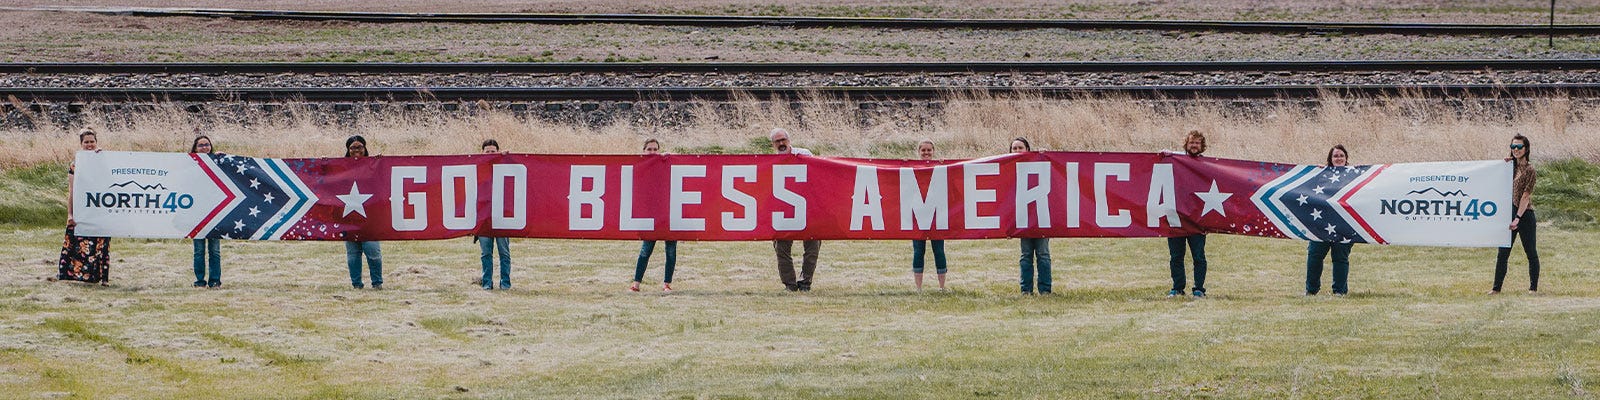 god bless america banner held up in field